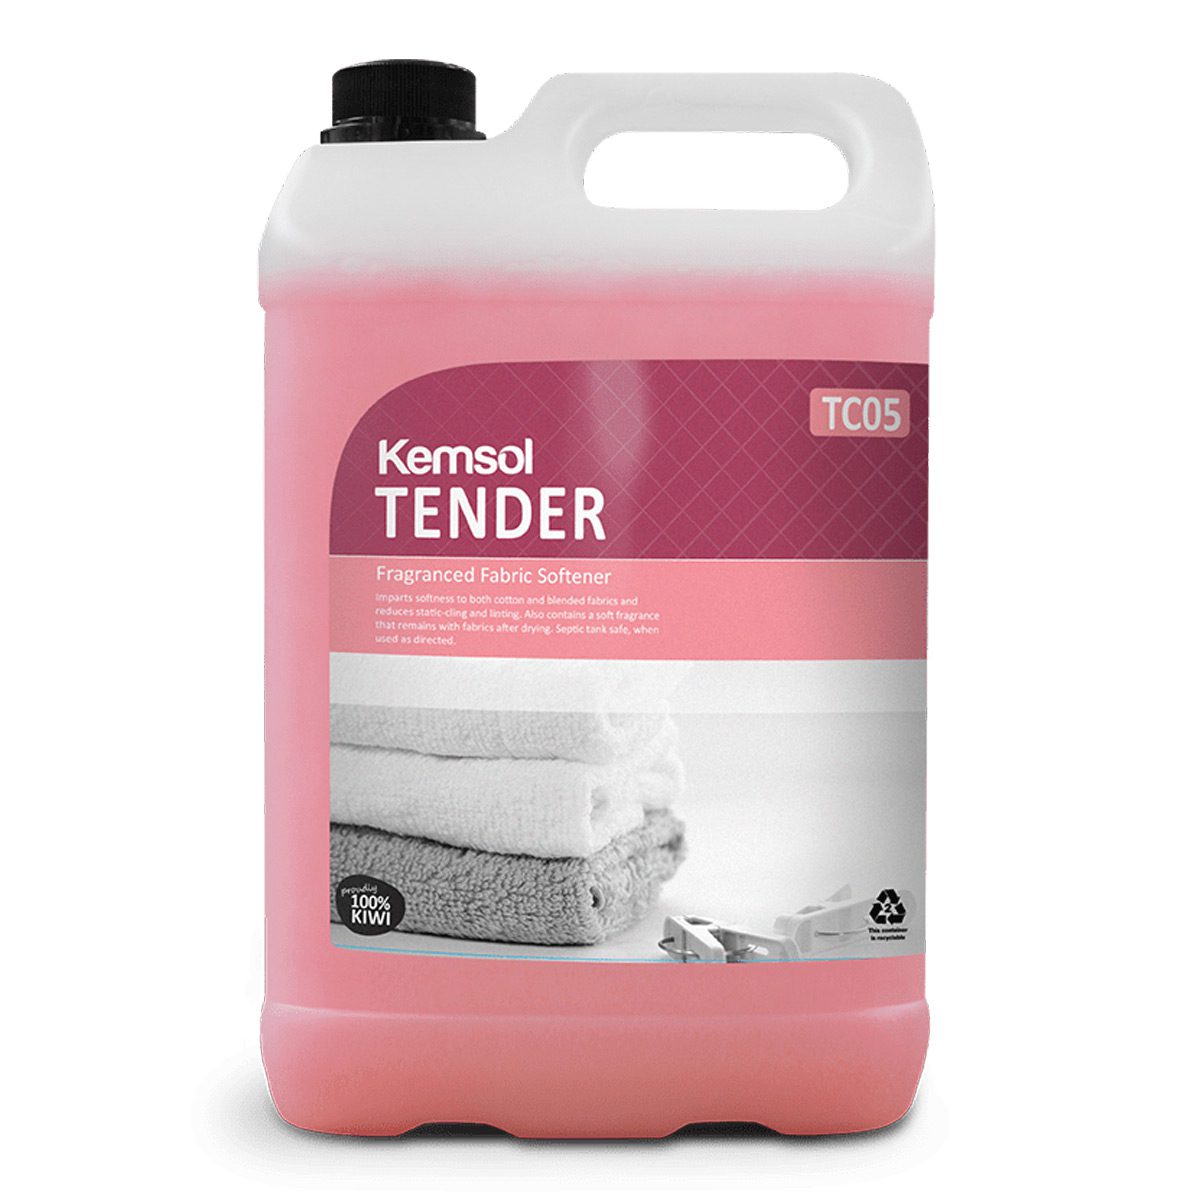 cleaning-products-laundry-kemsol-tender-fabric-softener-5L-litre-softness-cotton-blended-fabrics-reduces-static-cling-linting-soft fragrance-remains-fabrics-after-drying-vjs-distributors-KTEND